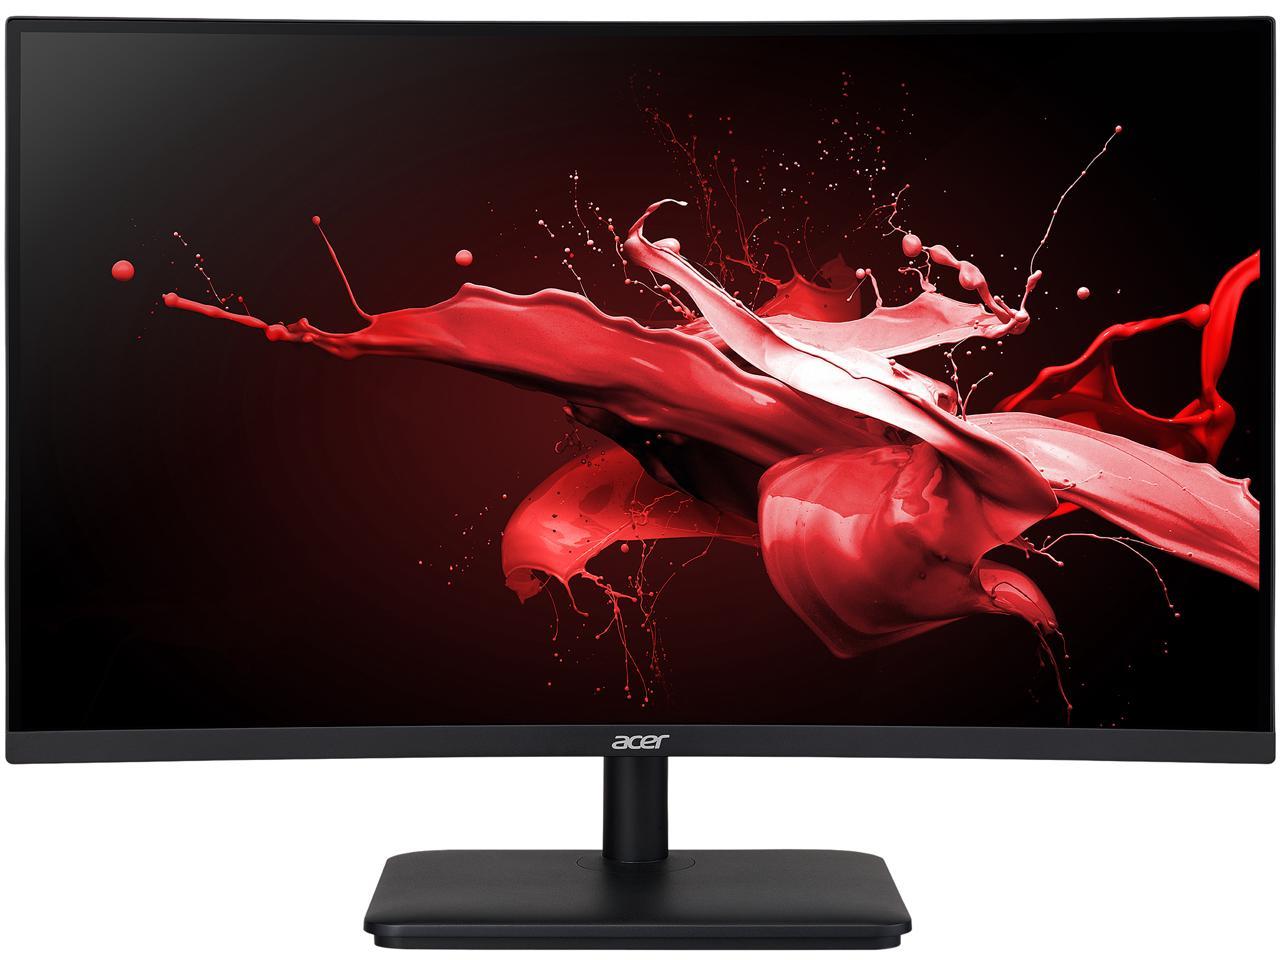 Acer 27", 240Hz Full HD, Curved Gaming Monitor, 1ms Adaptive-Sync,1920 x 1080, Built-in Speakers Nitro ED270 Xbmiipx $169.99